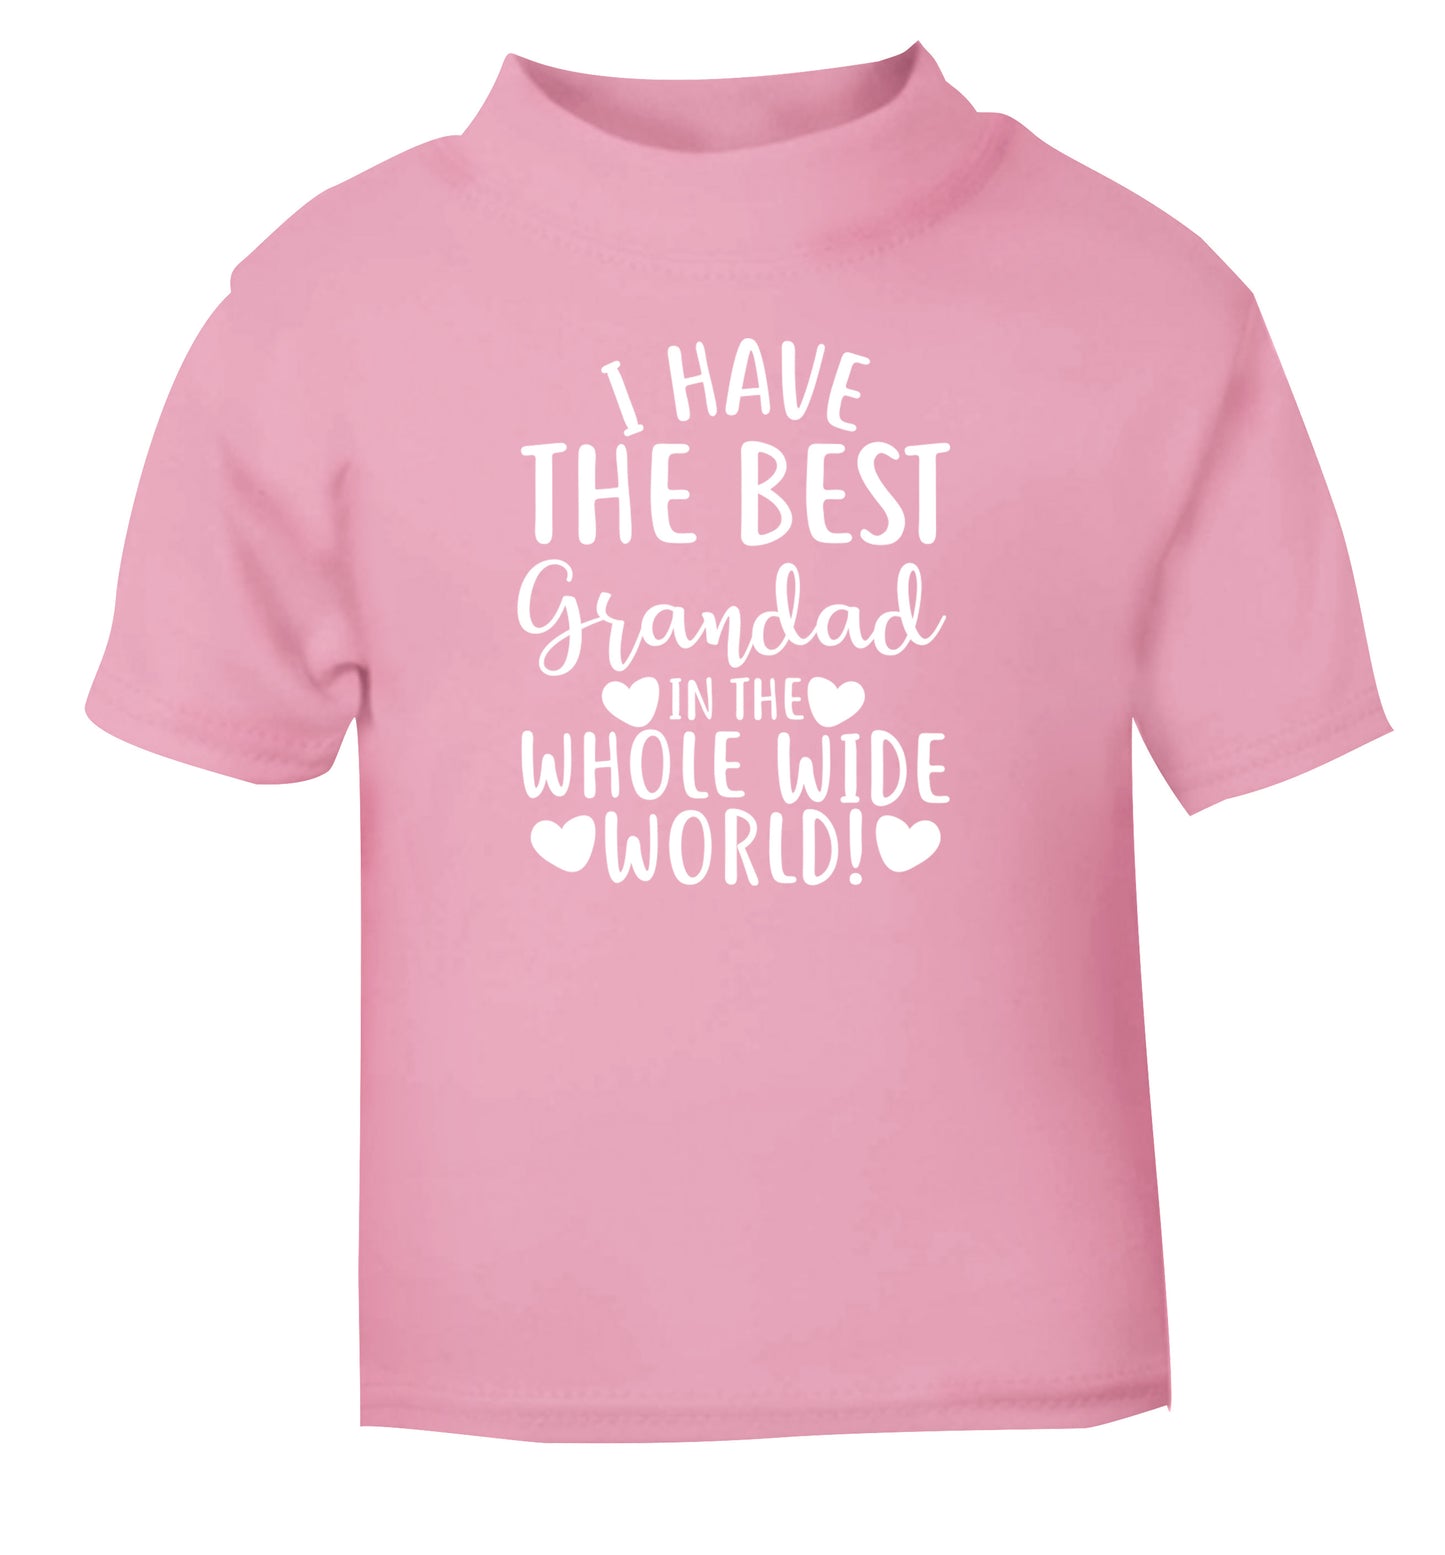 I have the best grandad in the whole wide world! light pink Baby Toddler Tshirt 2 Years